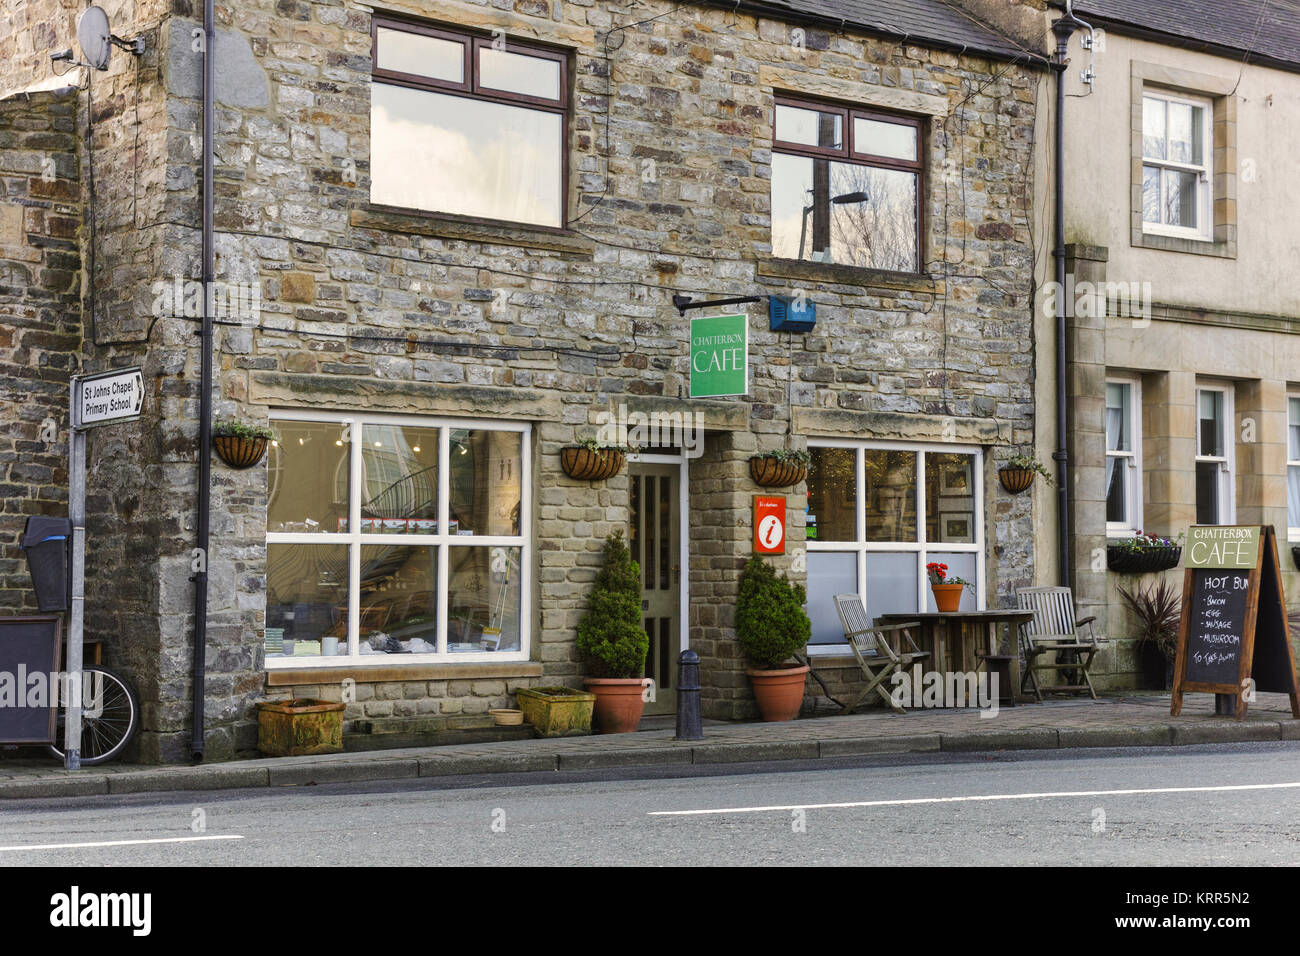 Cafe in the small village of St John's Chapel in upper Weardale in County Durham, North East England. Stock Photo